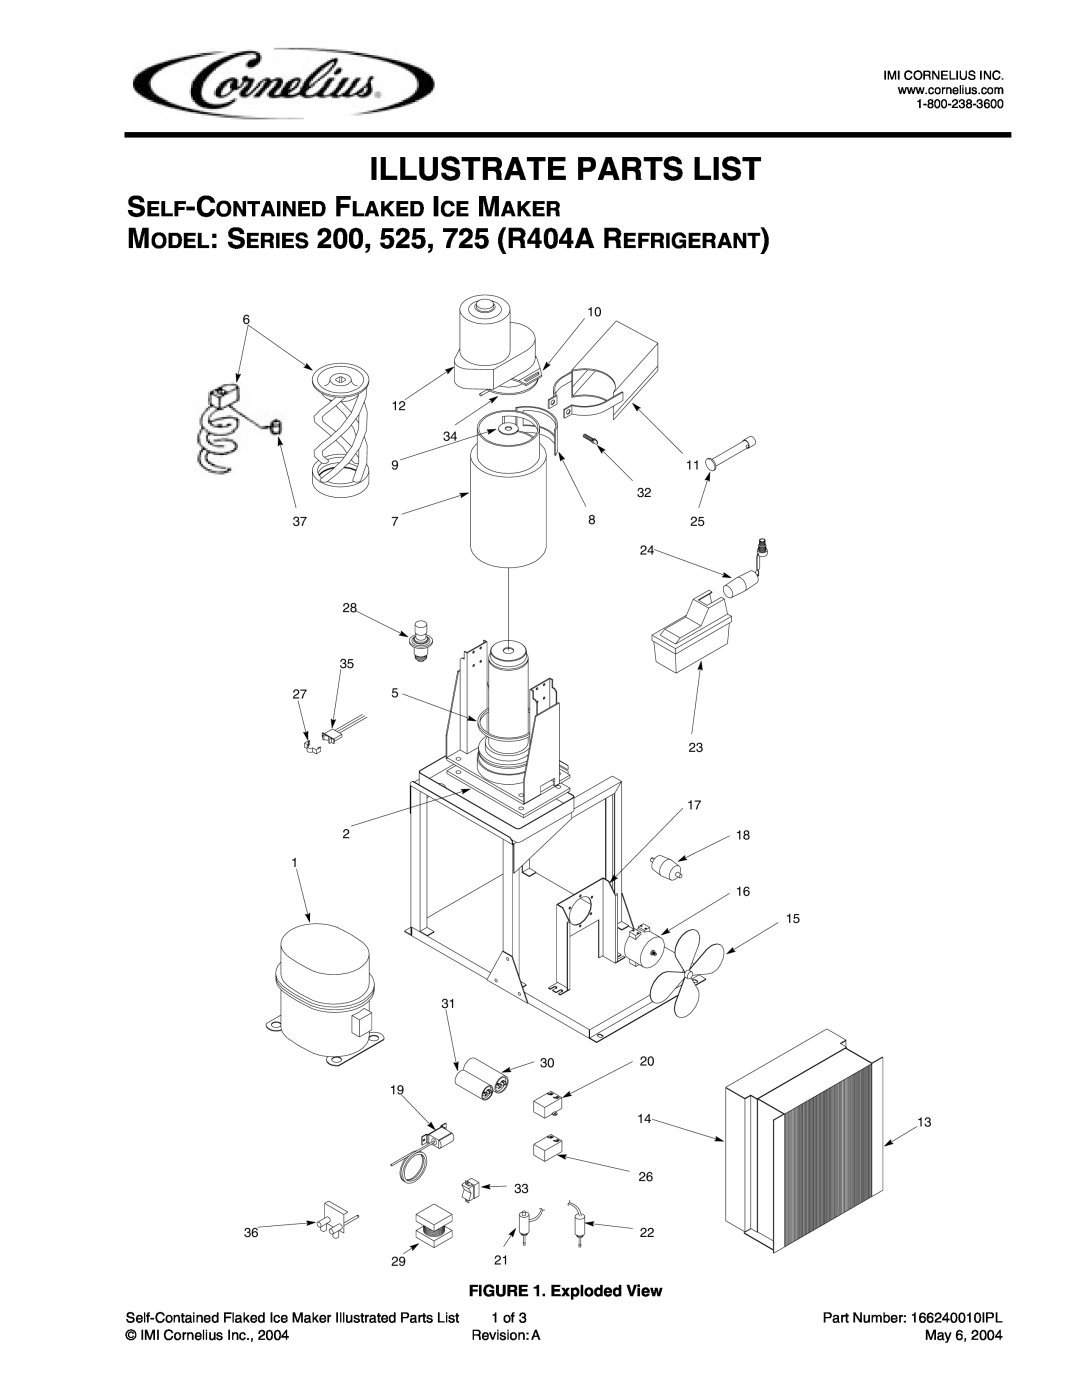 Cornelius manual Self-Contained Flaked Ice Maker, Illustrate Parts List, MODEL SERIES 200, 525, 725 R404A REFRIGERANT 